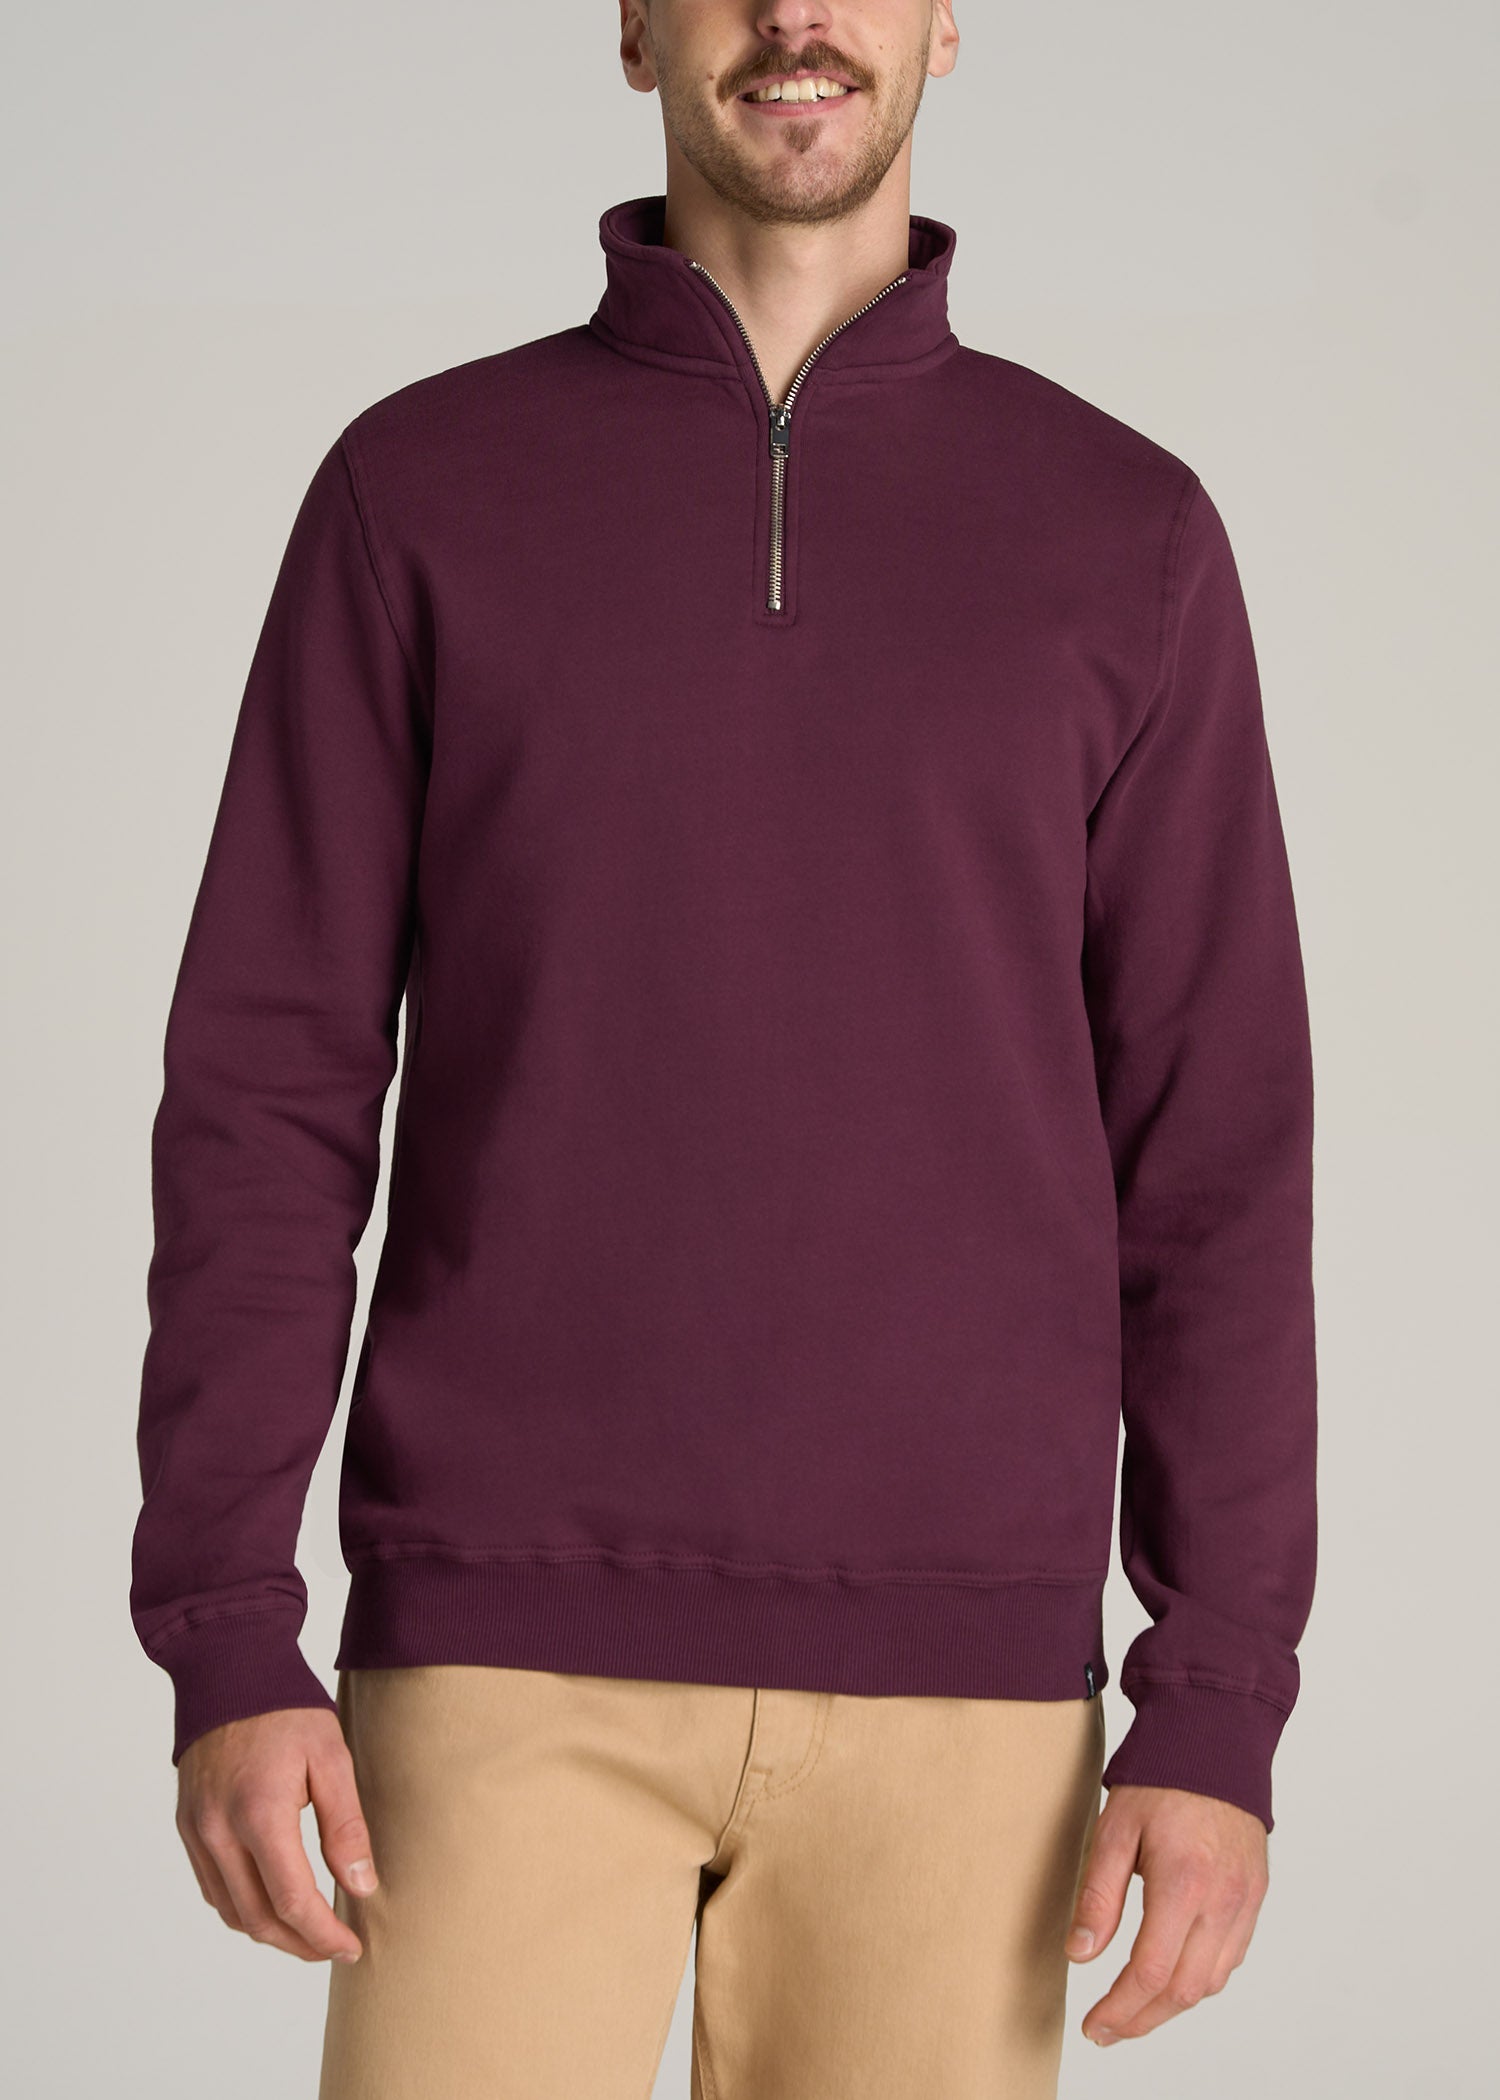 The Sports Club Quarter Zip Up Year of Ours Sweatshirt